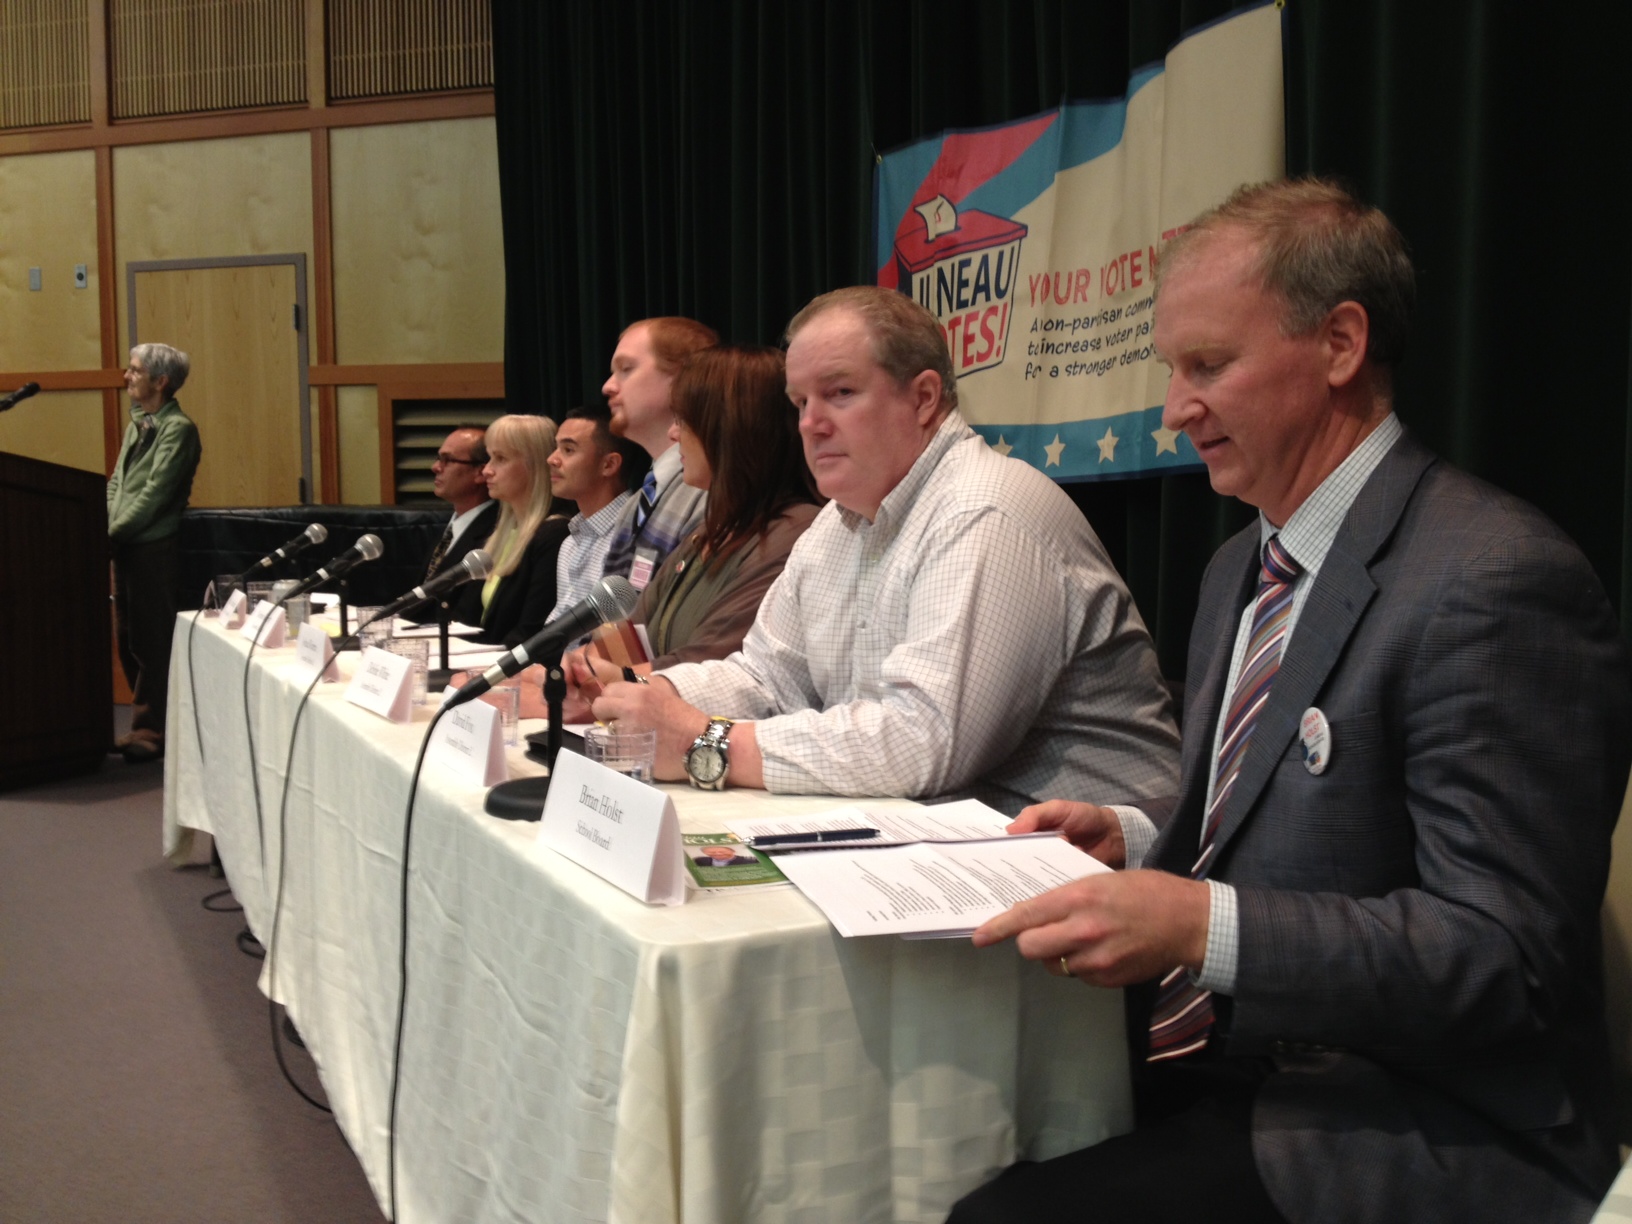 Six Juneau Assembly candidates and one school board candidate participated in a Juneau Votes Forum at UAS Wednesday. (Photo by Lisa Phu/KTOO)